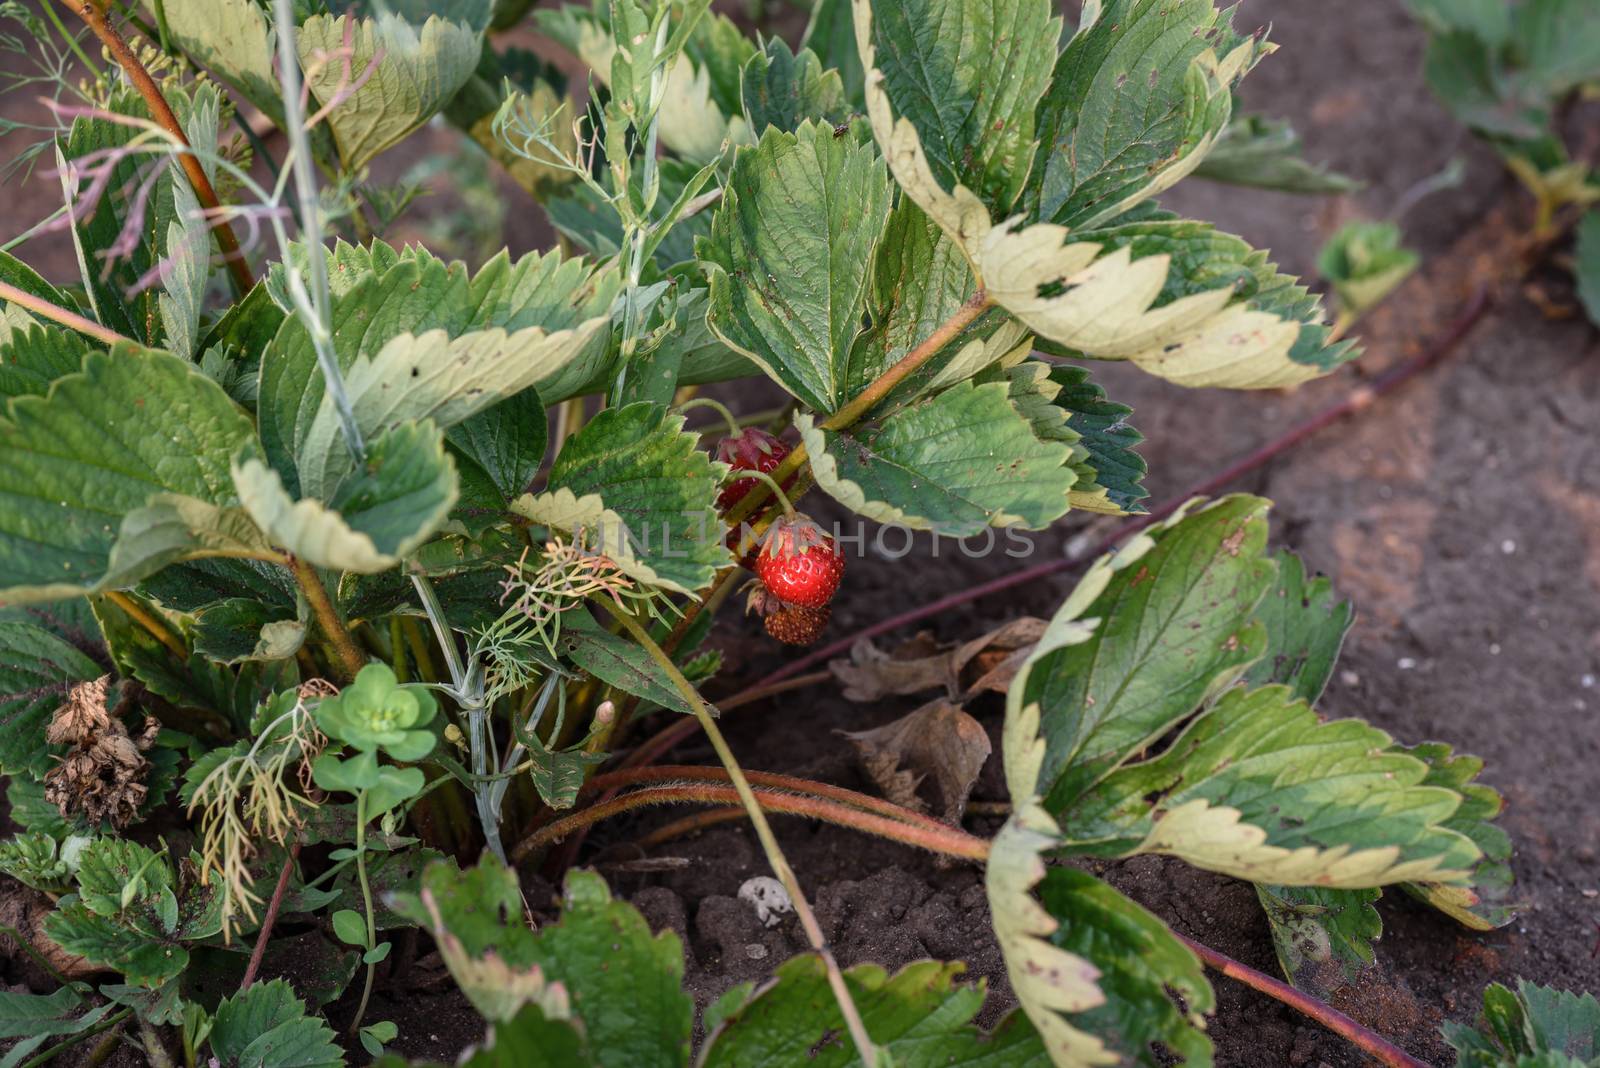 Ripe strawberries growing on a plant close up